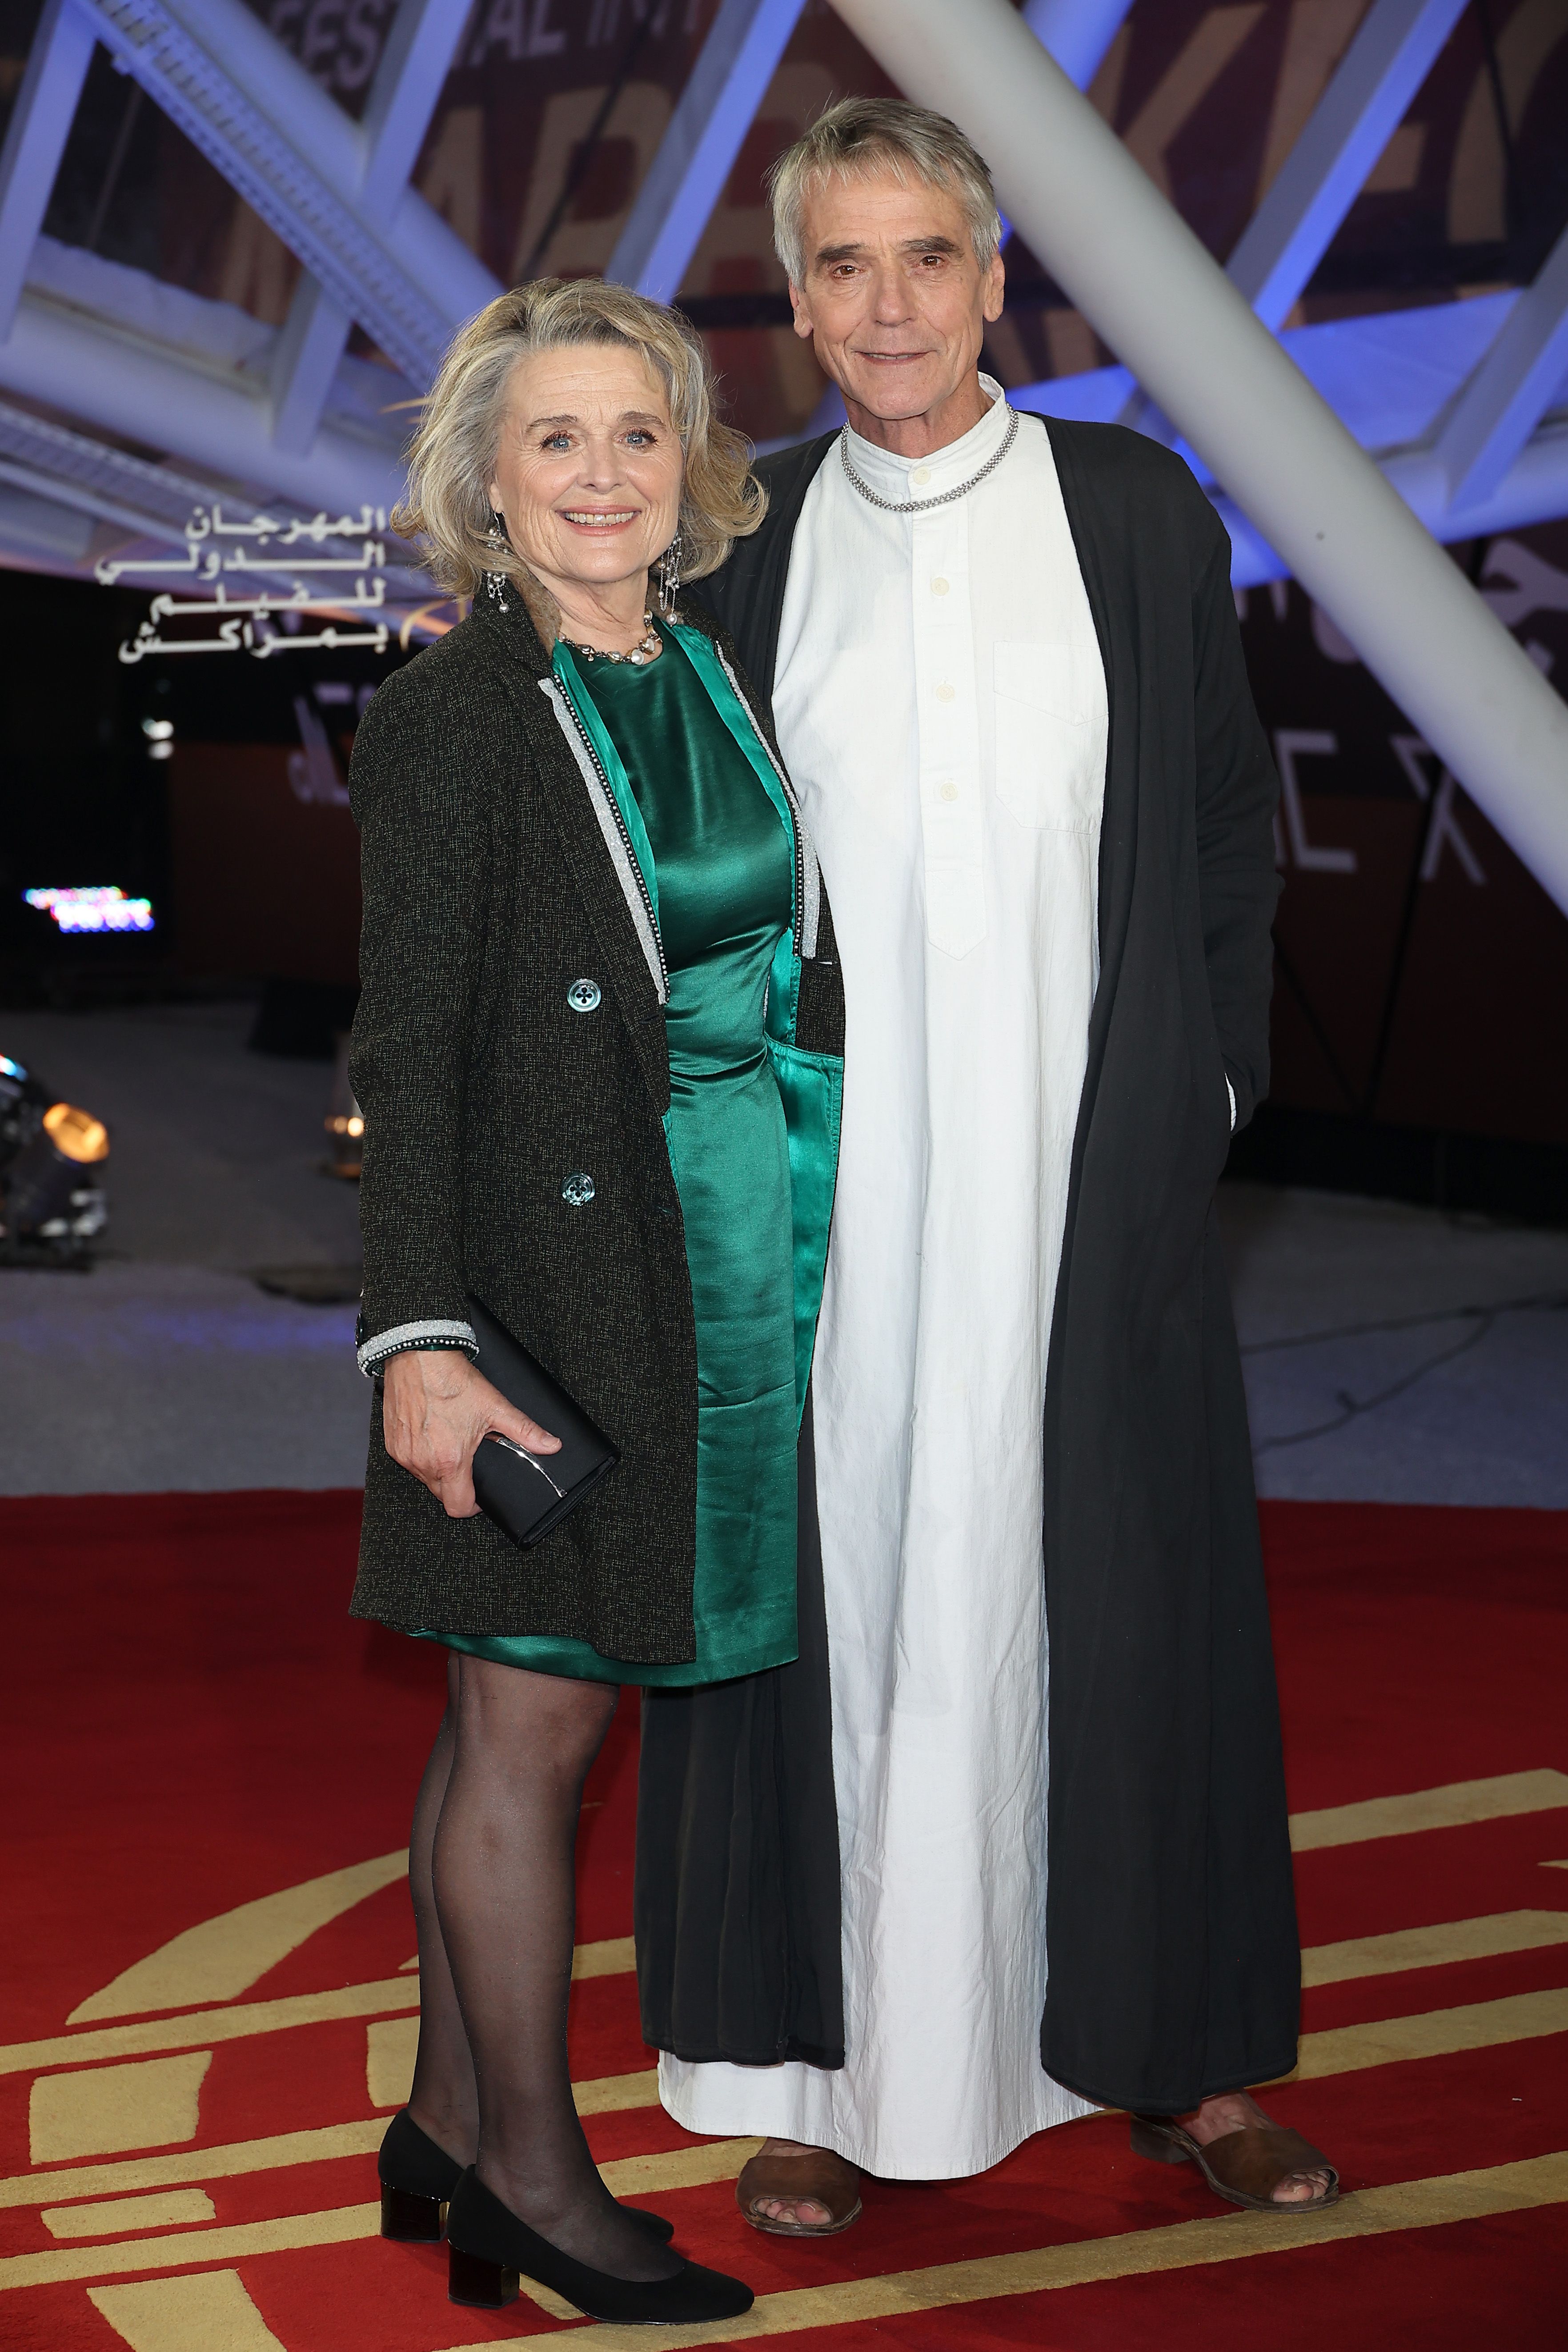 Jeremy Irons and Sinead Cusack in London, England, on January 9, 2012. | Source: Getty Images